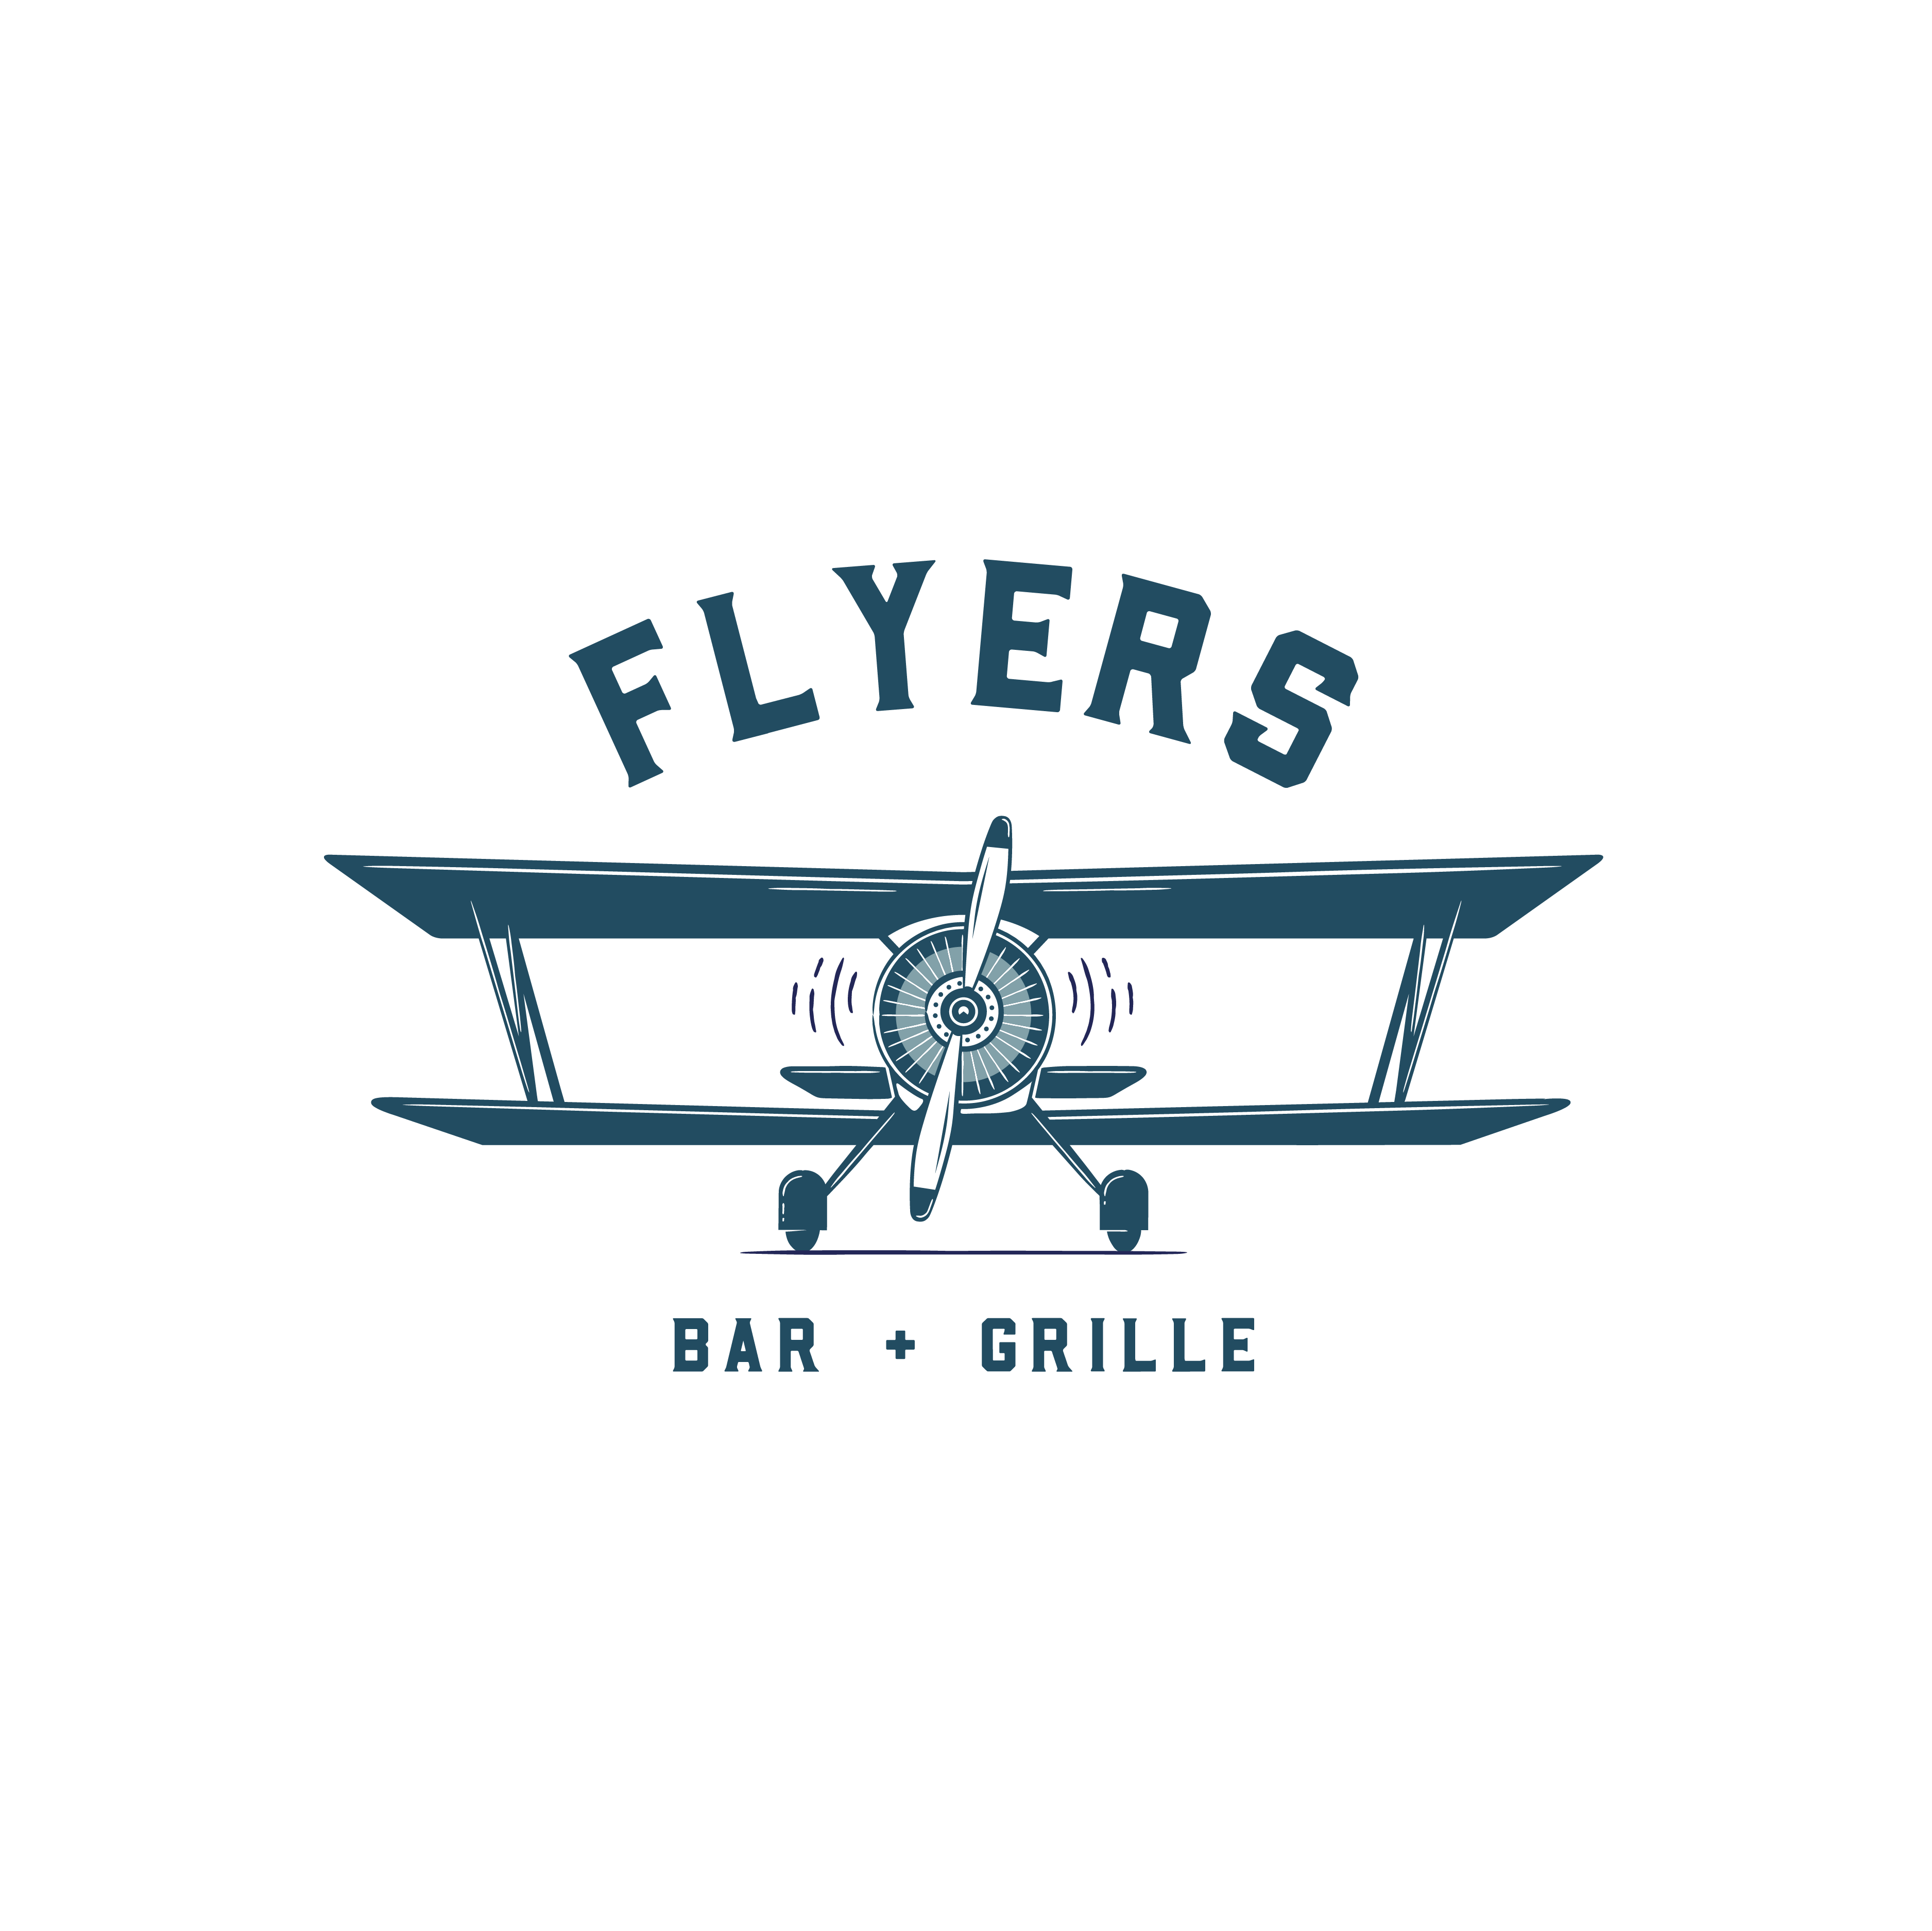 Flyers Bar + Grille Logo logo design by logo designer Mirka Studios for your inspiration and for the worlds largest logo competition